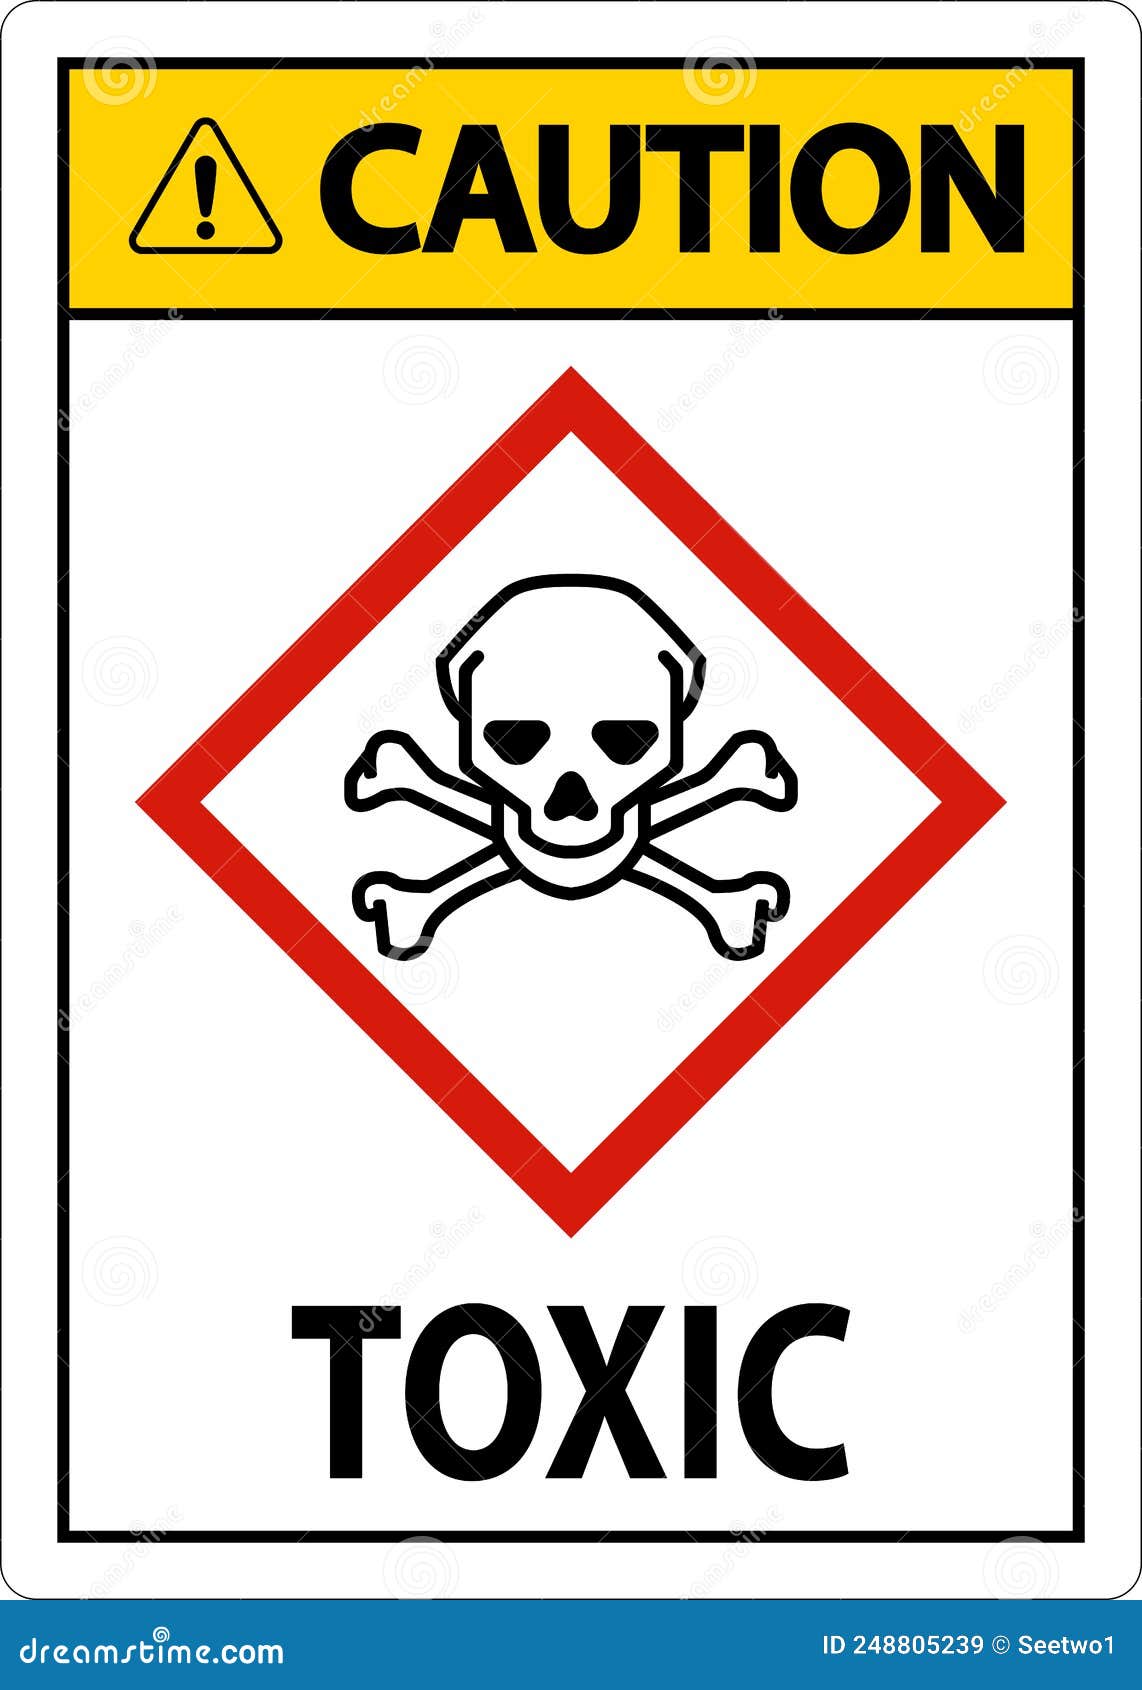 Caution Toxic Chemicals Symbol Sign On White Background Cartoon Vector